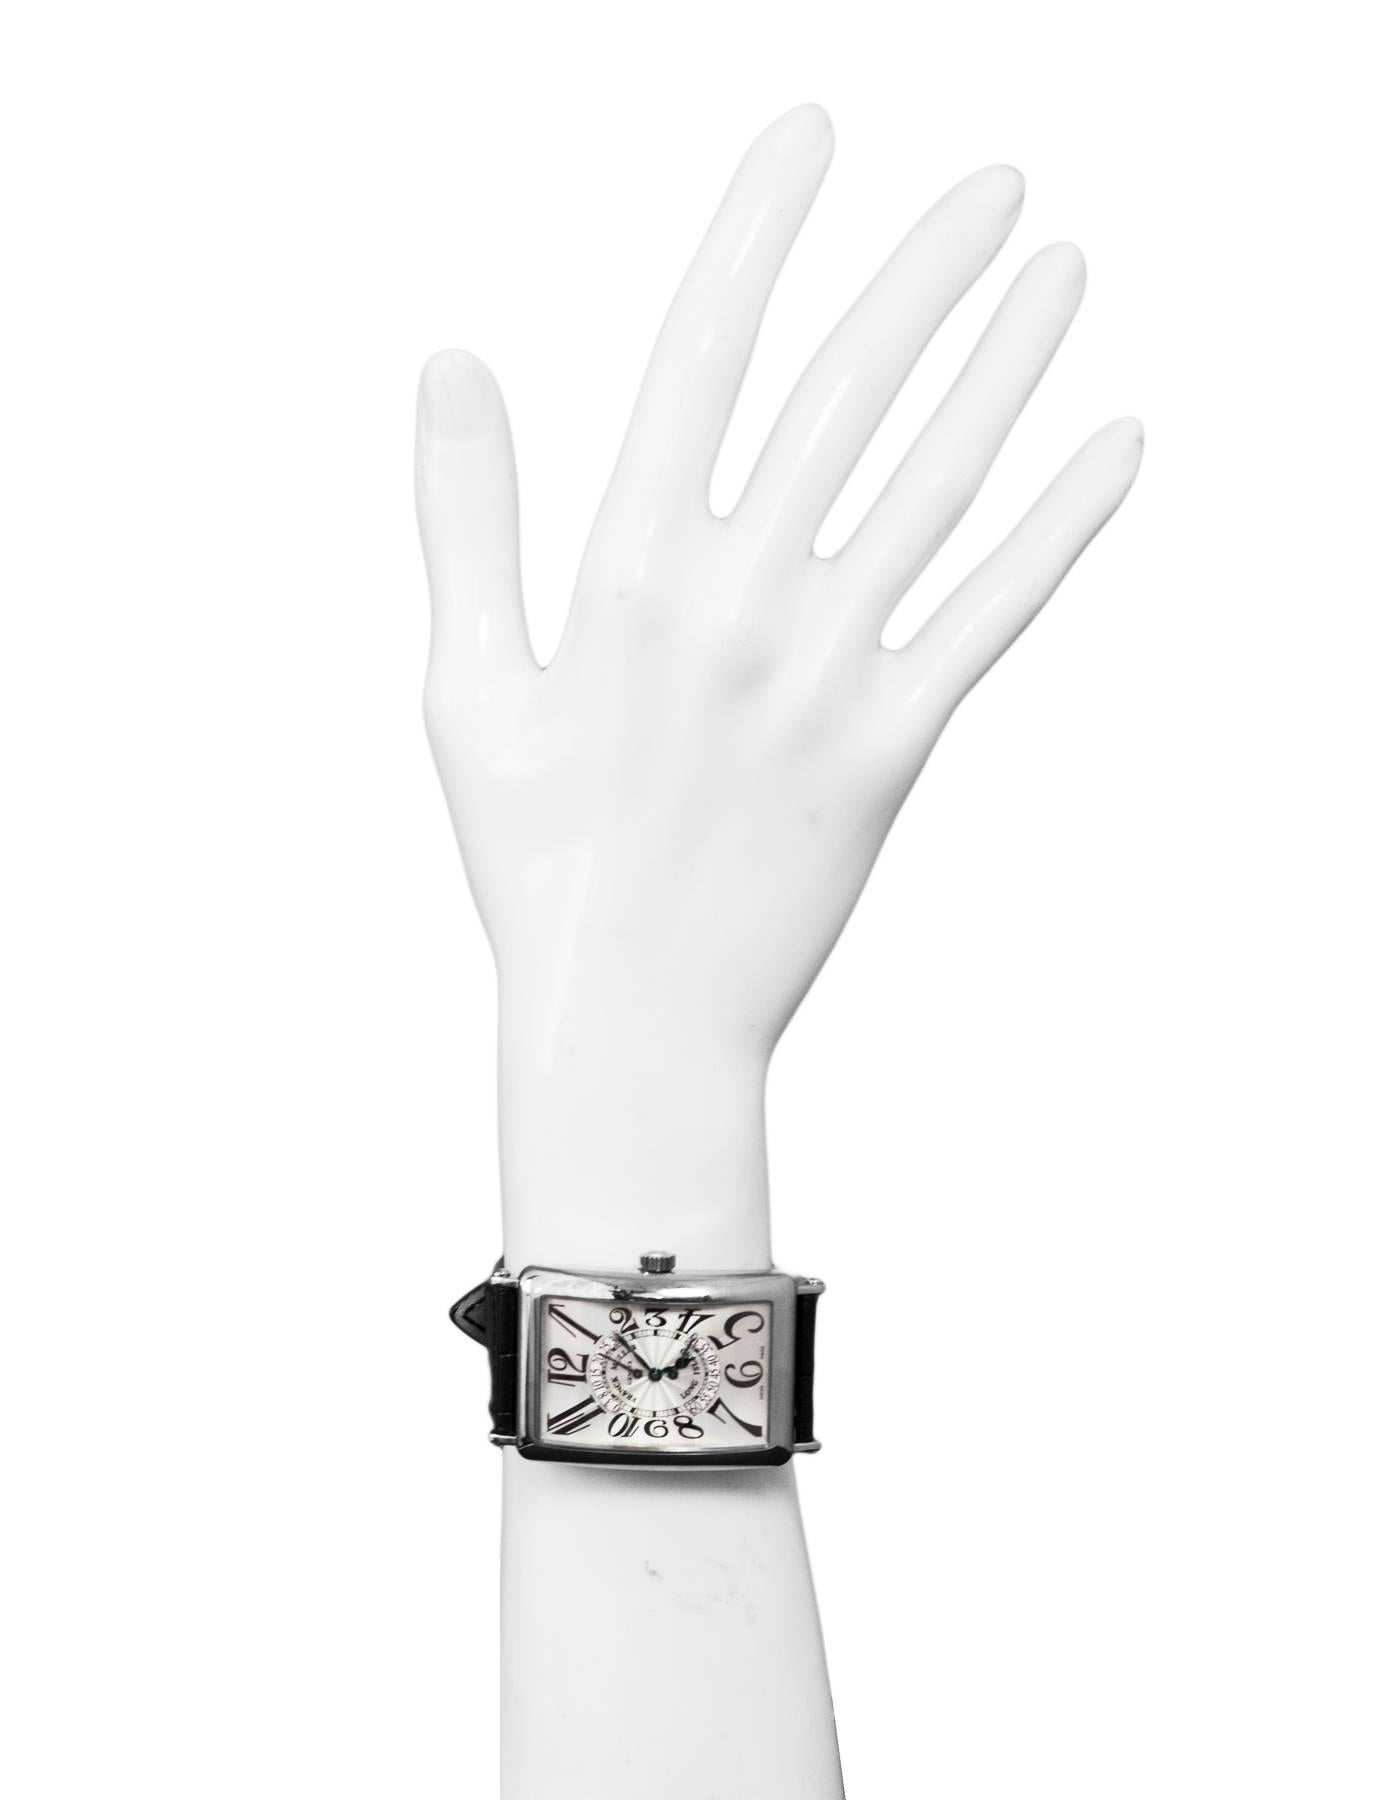 Franck Muller 18k White Gold Long Island Bi-Retrograde Automatic Watch
Features a 32mm x 55mm 18k white gold case surrounding a silvered dial on a black alligator strap with an 18k white gold buckle. Functions include hours, minutes and